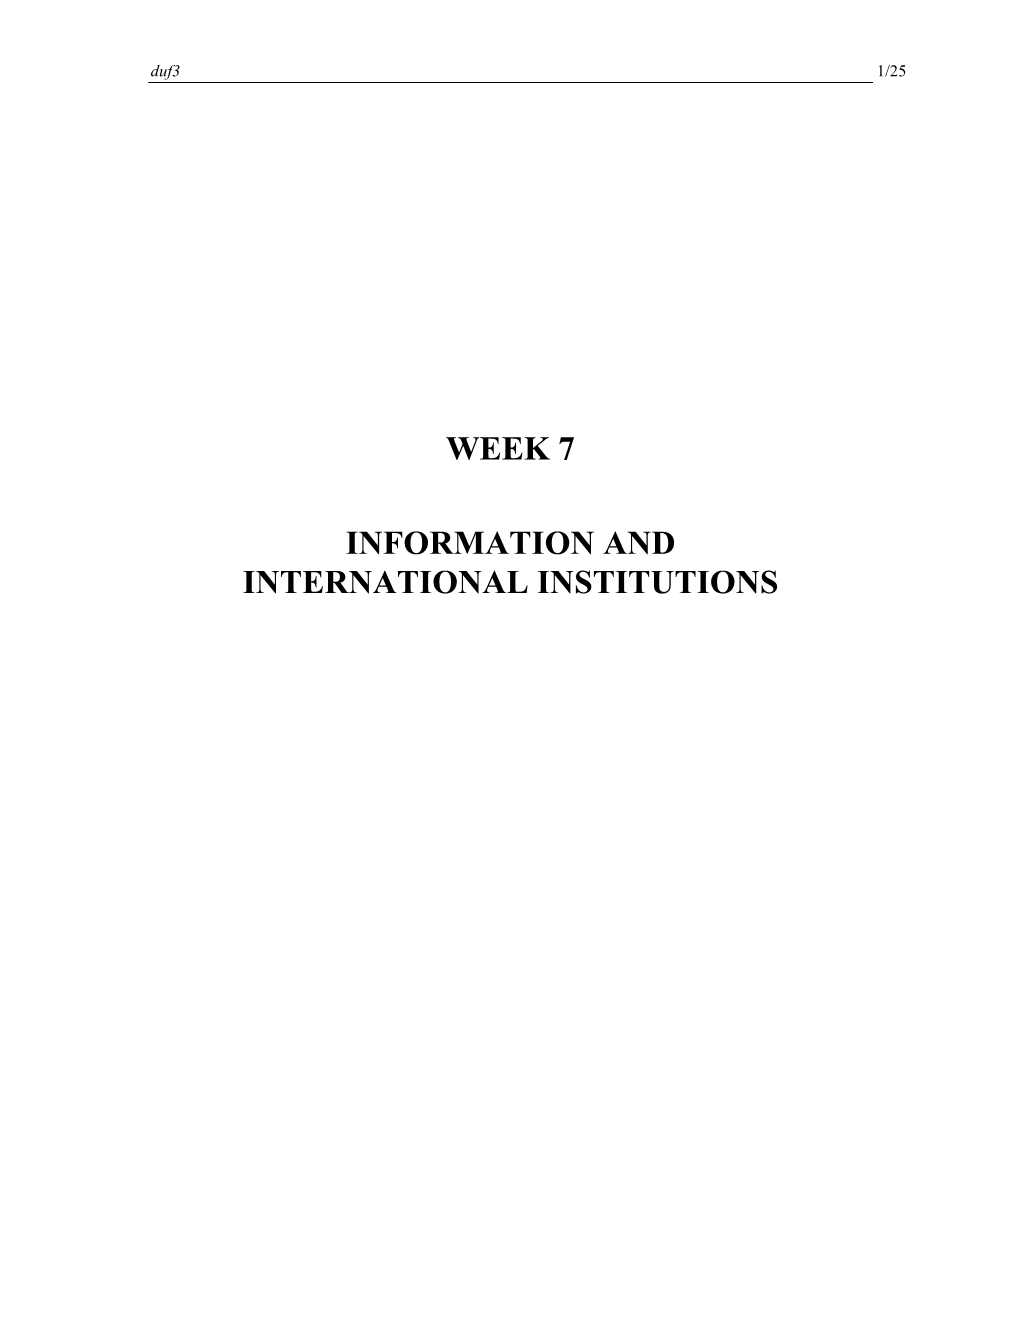 INFORMATION and INTERNATIONAL INSTITUTIONS Duf3 2/25